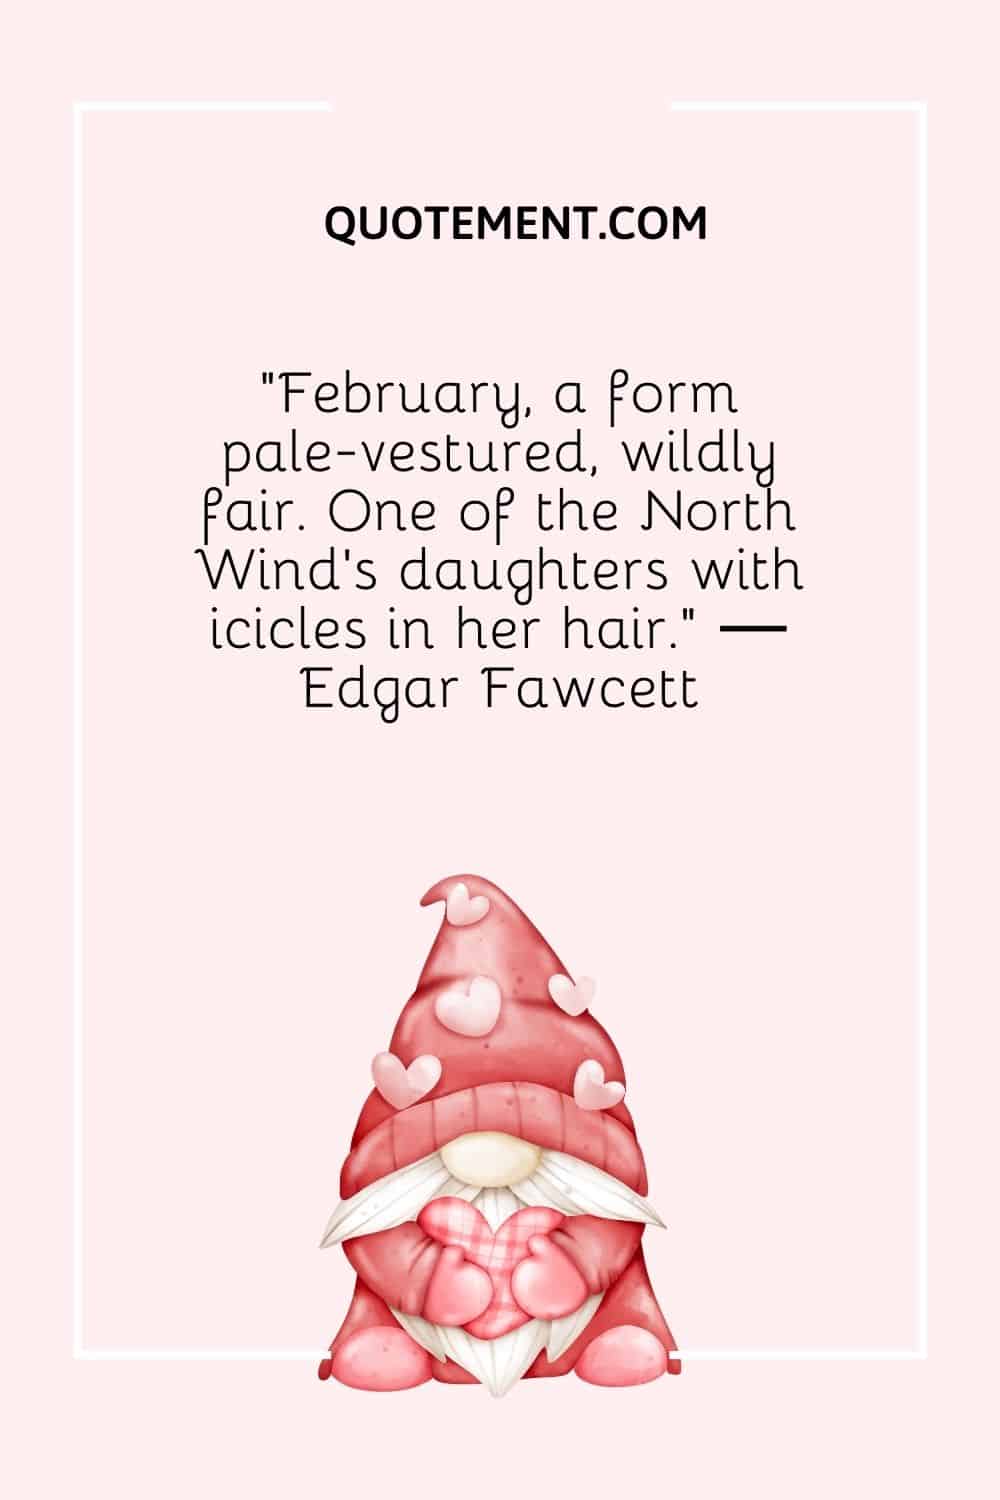 “February, a form pale-vestured, wildly fair. One of the North Wind’s daughters with icicles in her hair.” ― Edgar Fawcett